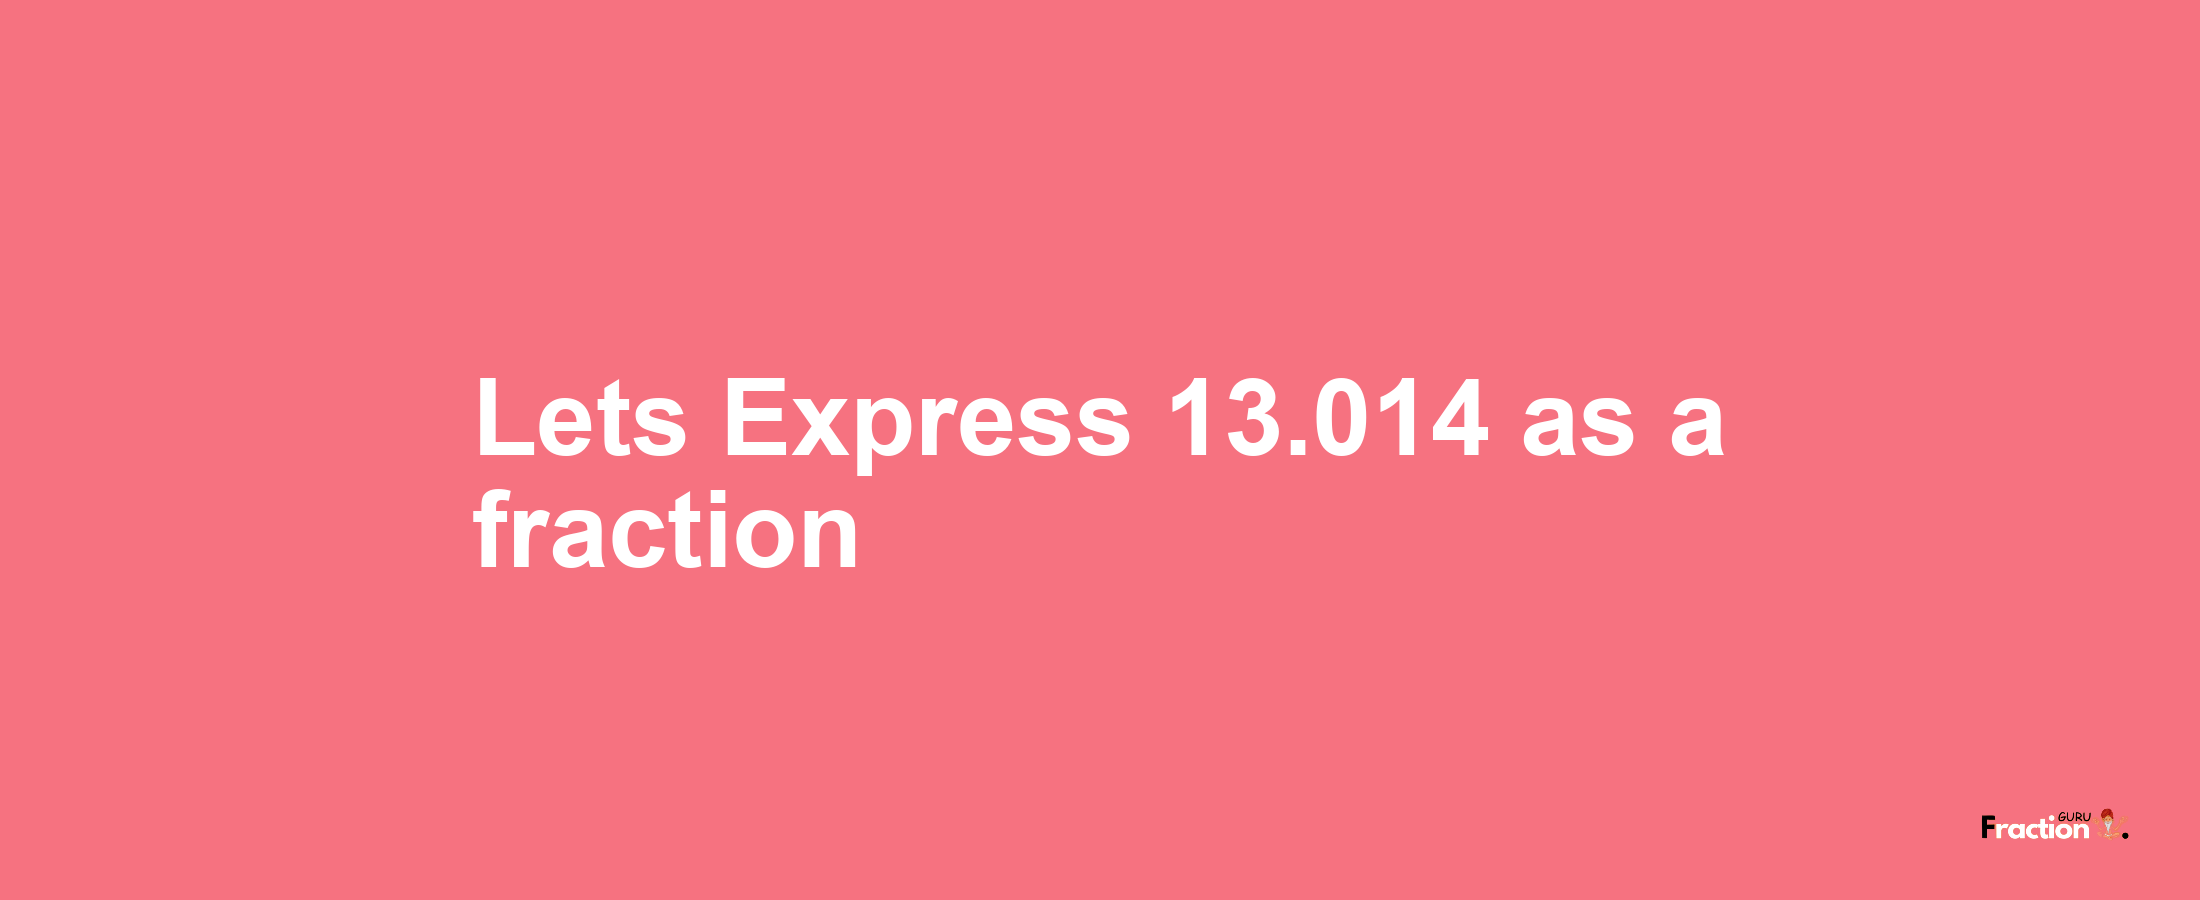 Lets Express 13.014 as afraction